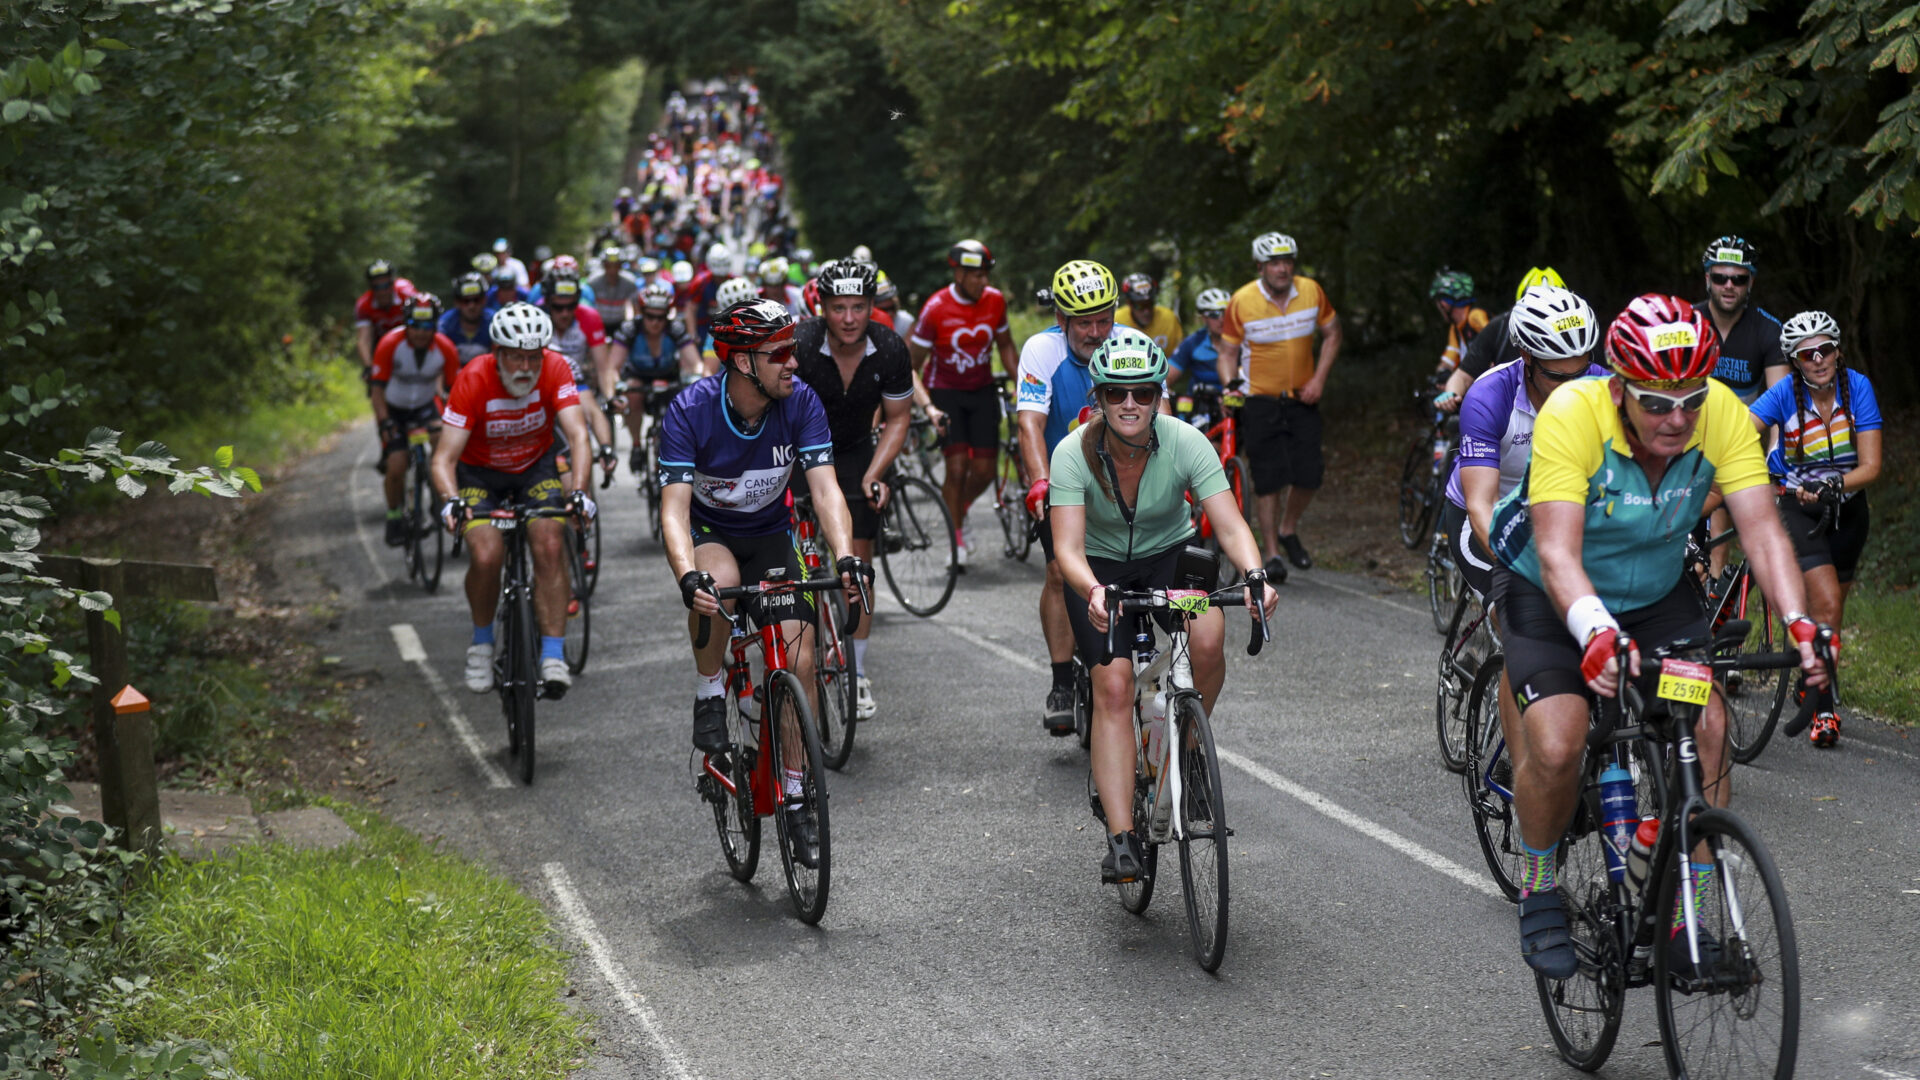 Prudential RideLondon August 2019